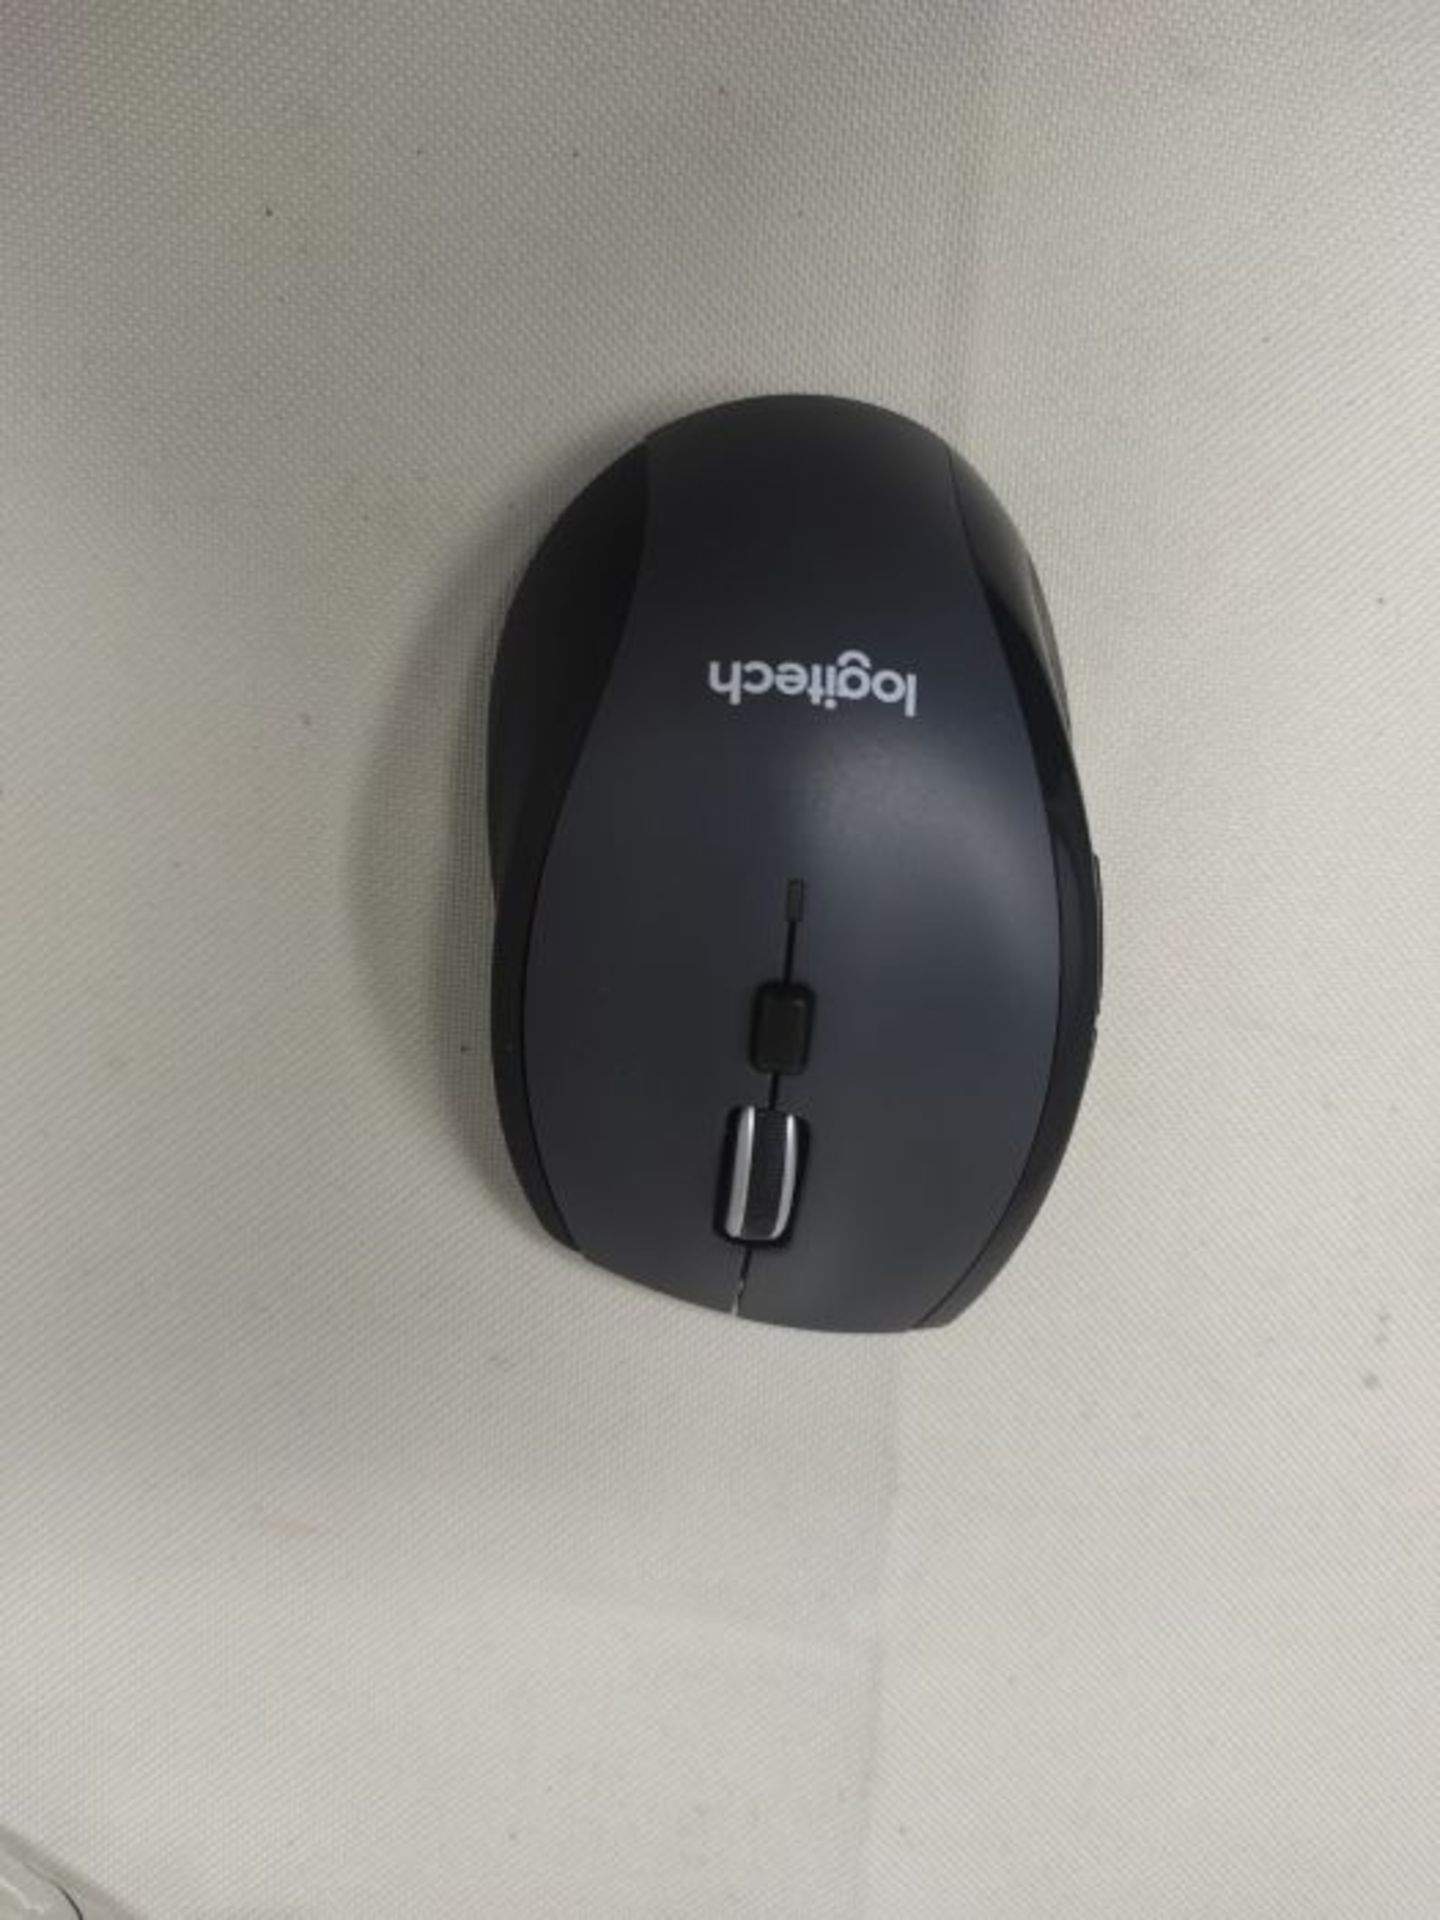 Logitech M705 Marathon Wireless Mouse, 2.4 GHz with USB Unifying Mini-Receiver, 1000 D - Image 2 of 2